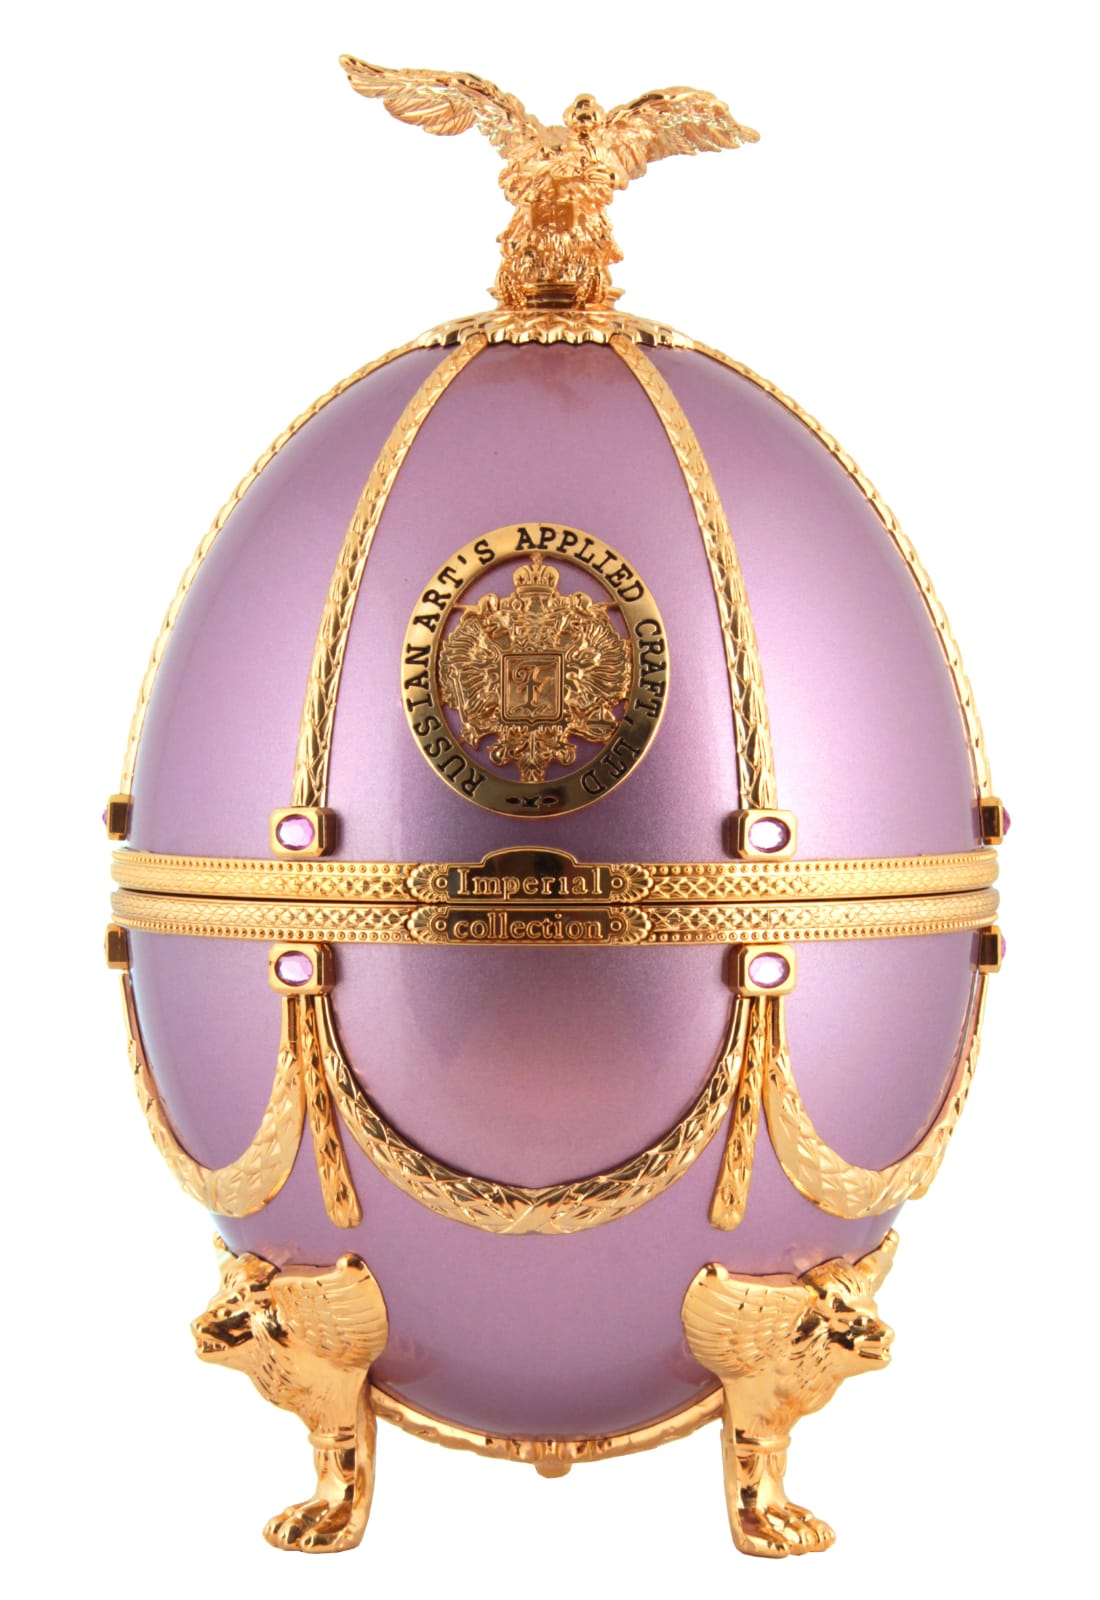 Oeuf de Fabergé Lilas Collection Imperial www.oeuf-de-faberge.fr